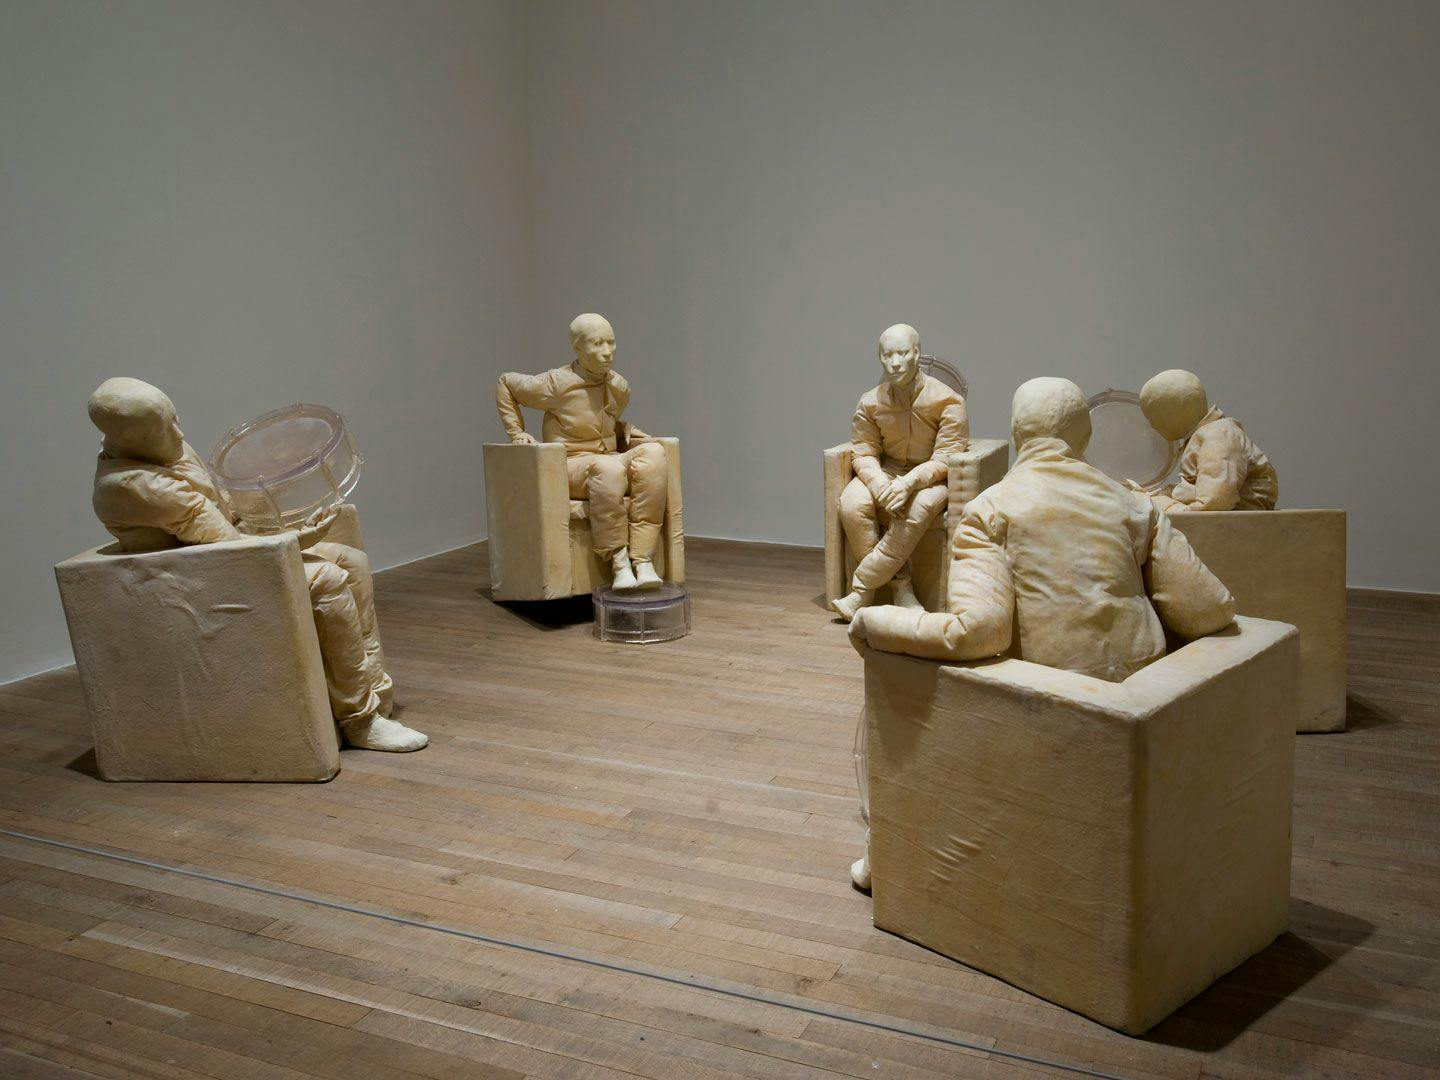 A mixed media sculpture by Juan Muñoz, titled Seated Figures with Five Drums, at Tate Modern, in London, England, in 2008.